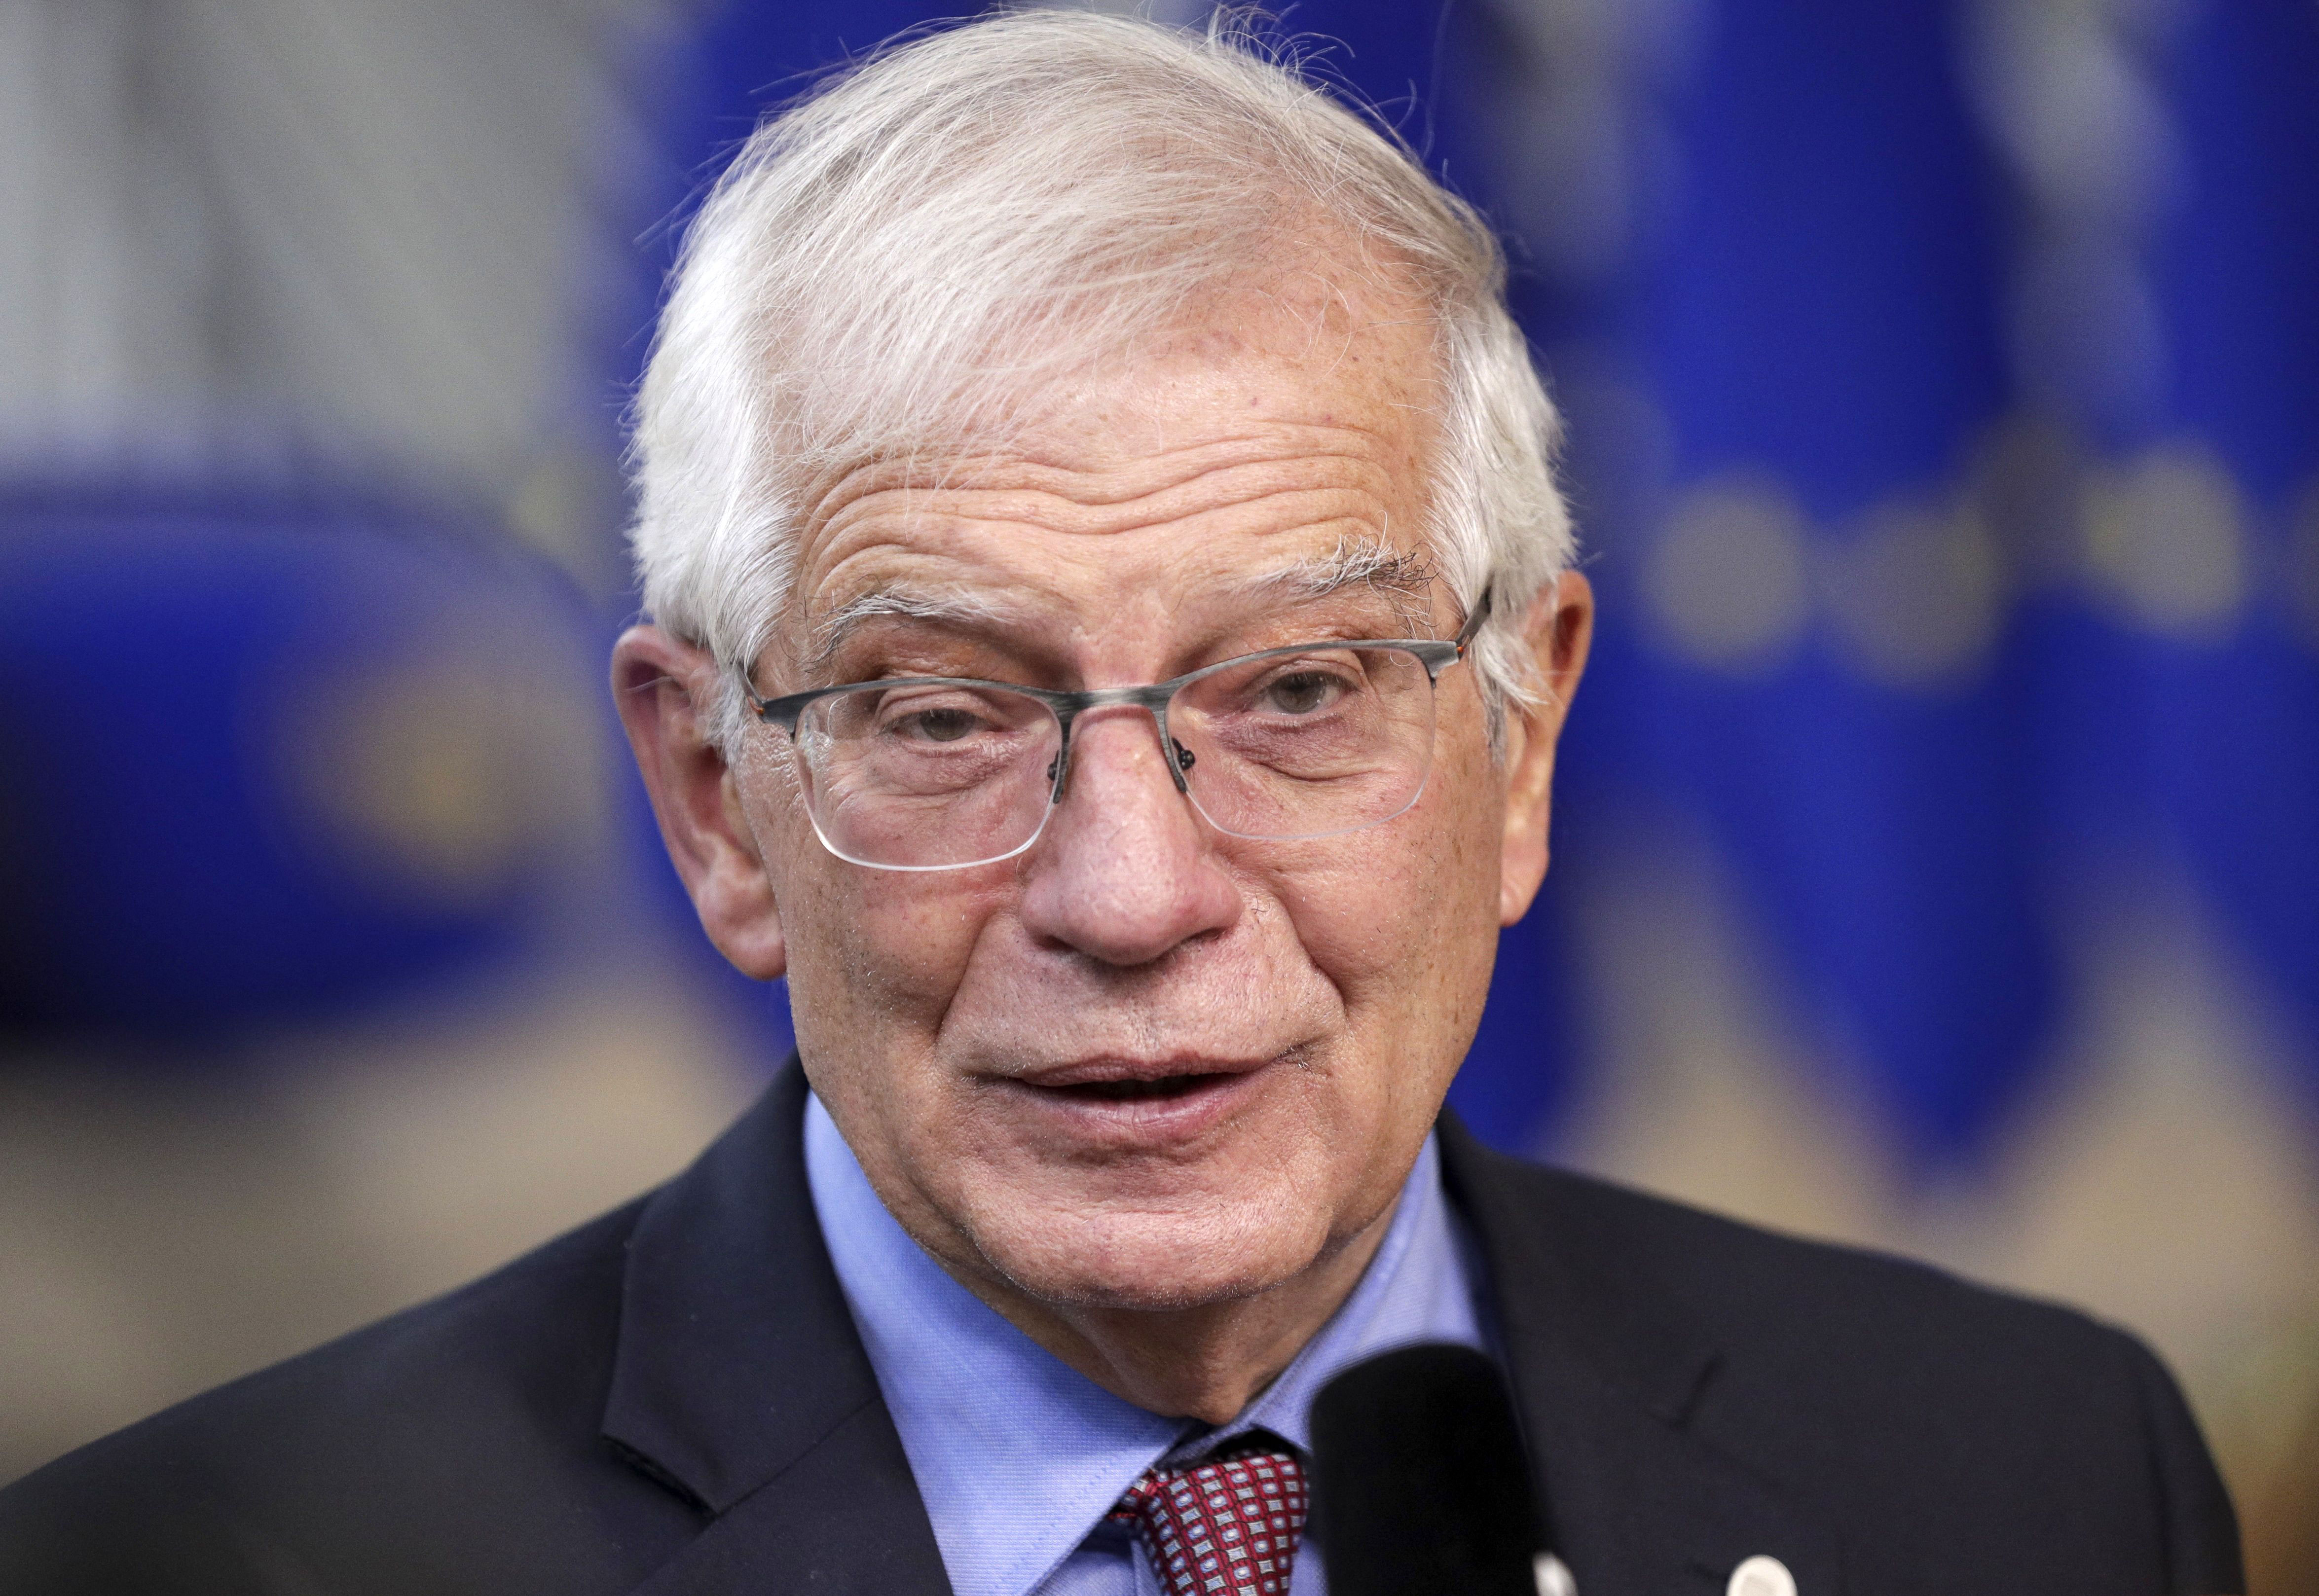 Josep Borrell, the European Union’s foreign policy chief, speaks to the media at a summit in Brussels, Belgium, on October 21.